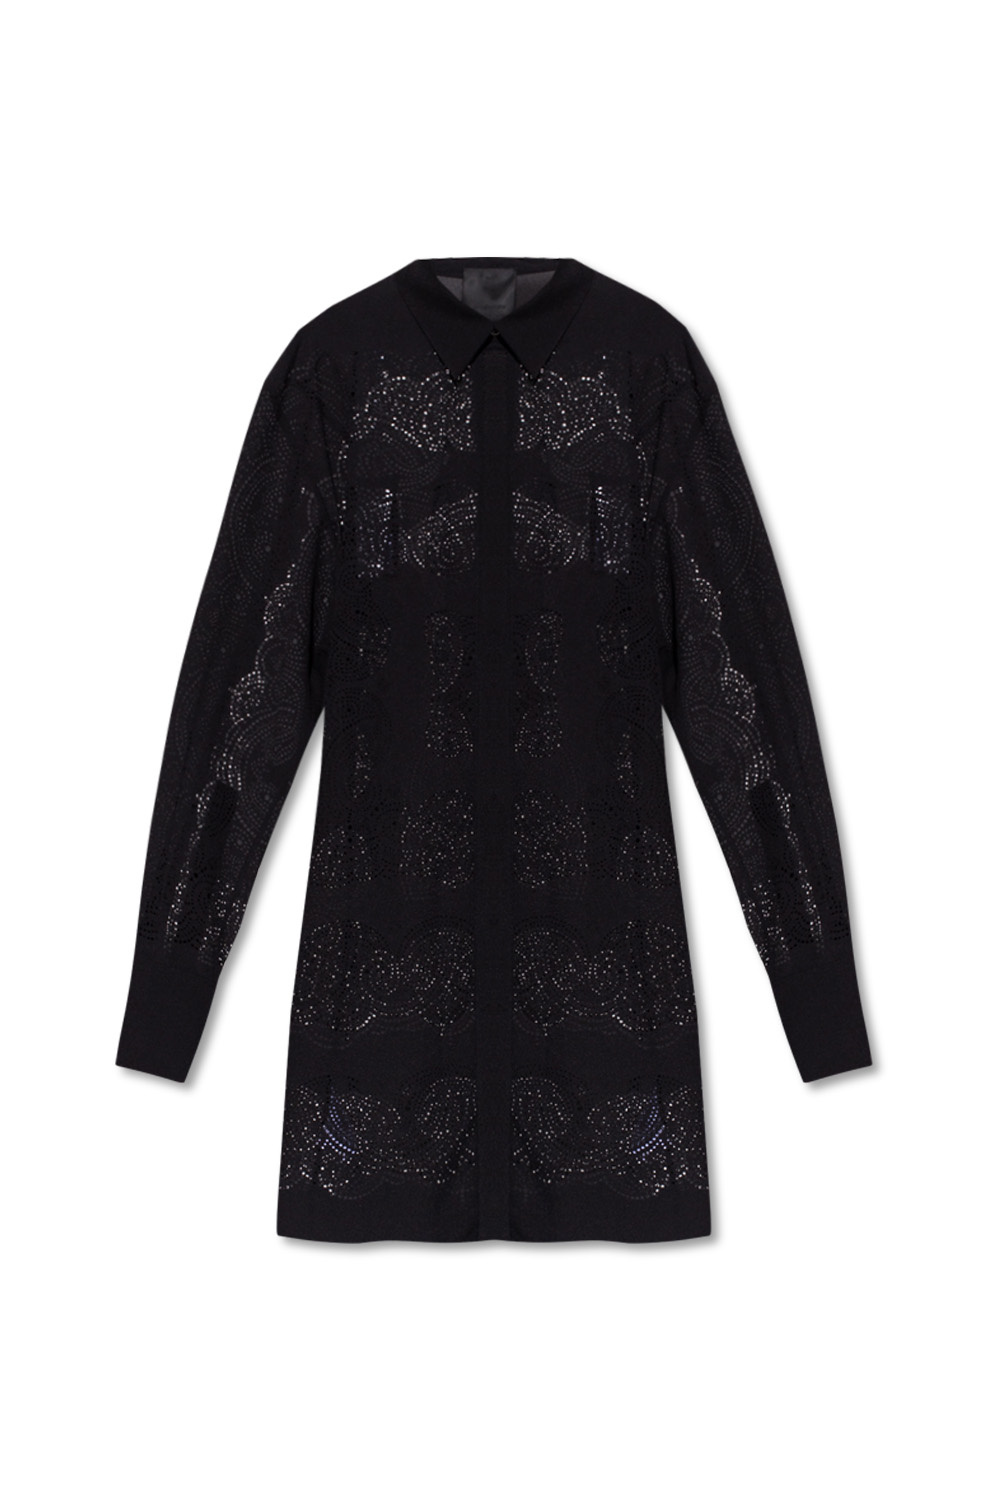 Givenchy Openwork shirt